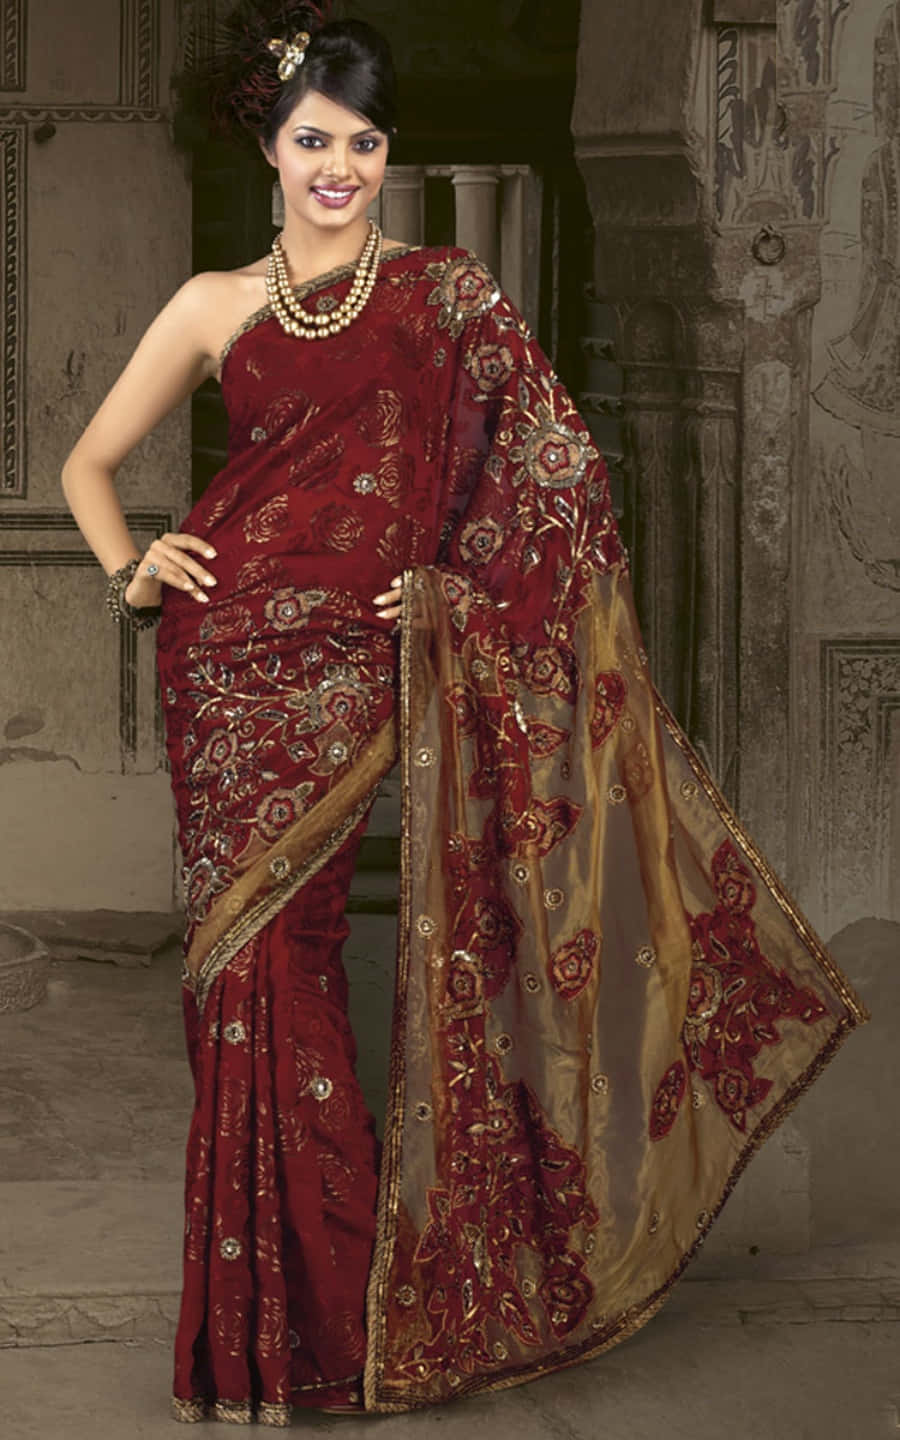 A Woman In A Red Sari